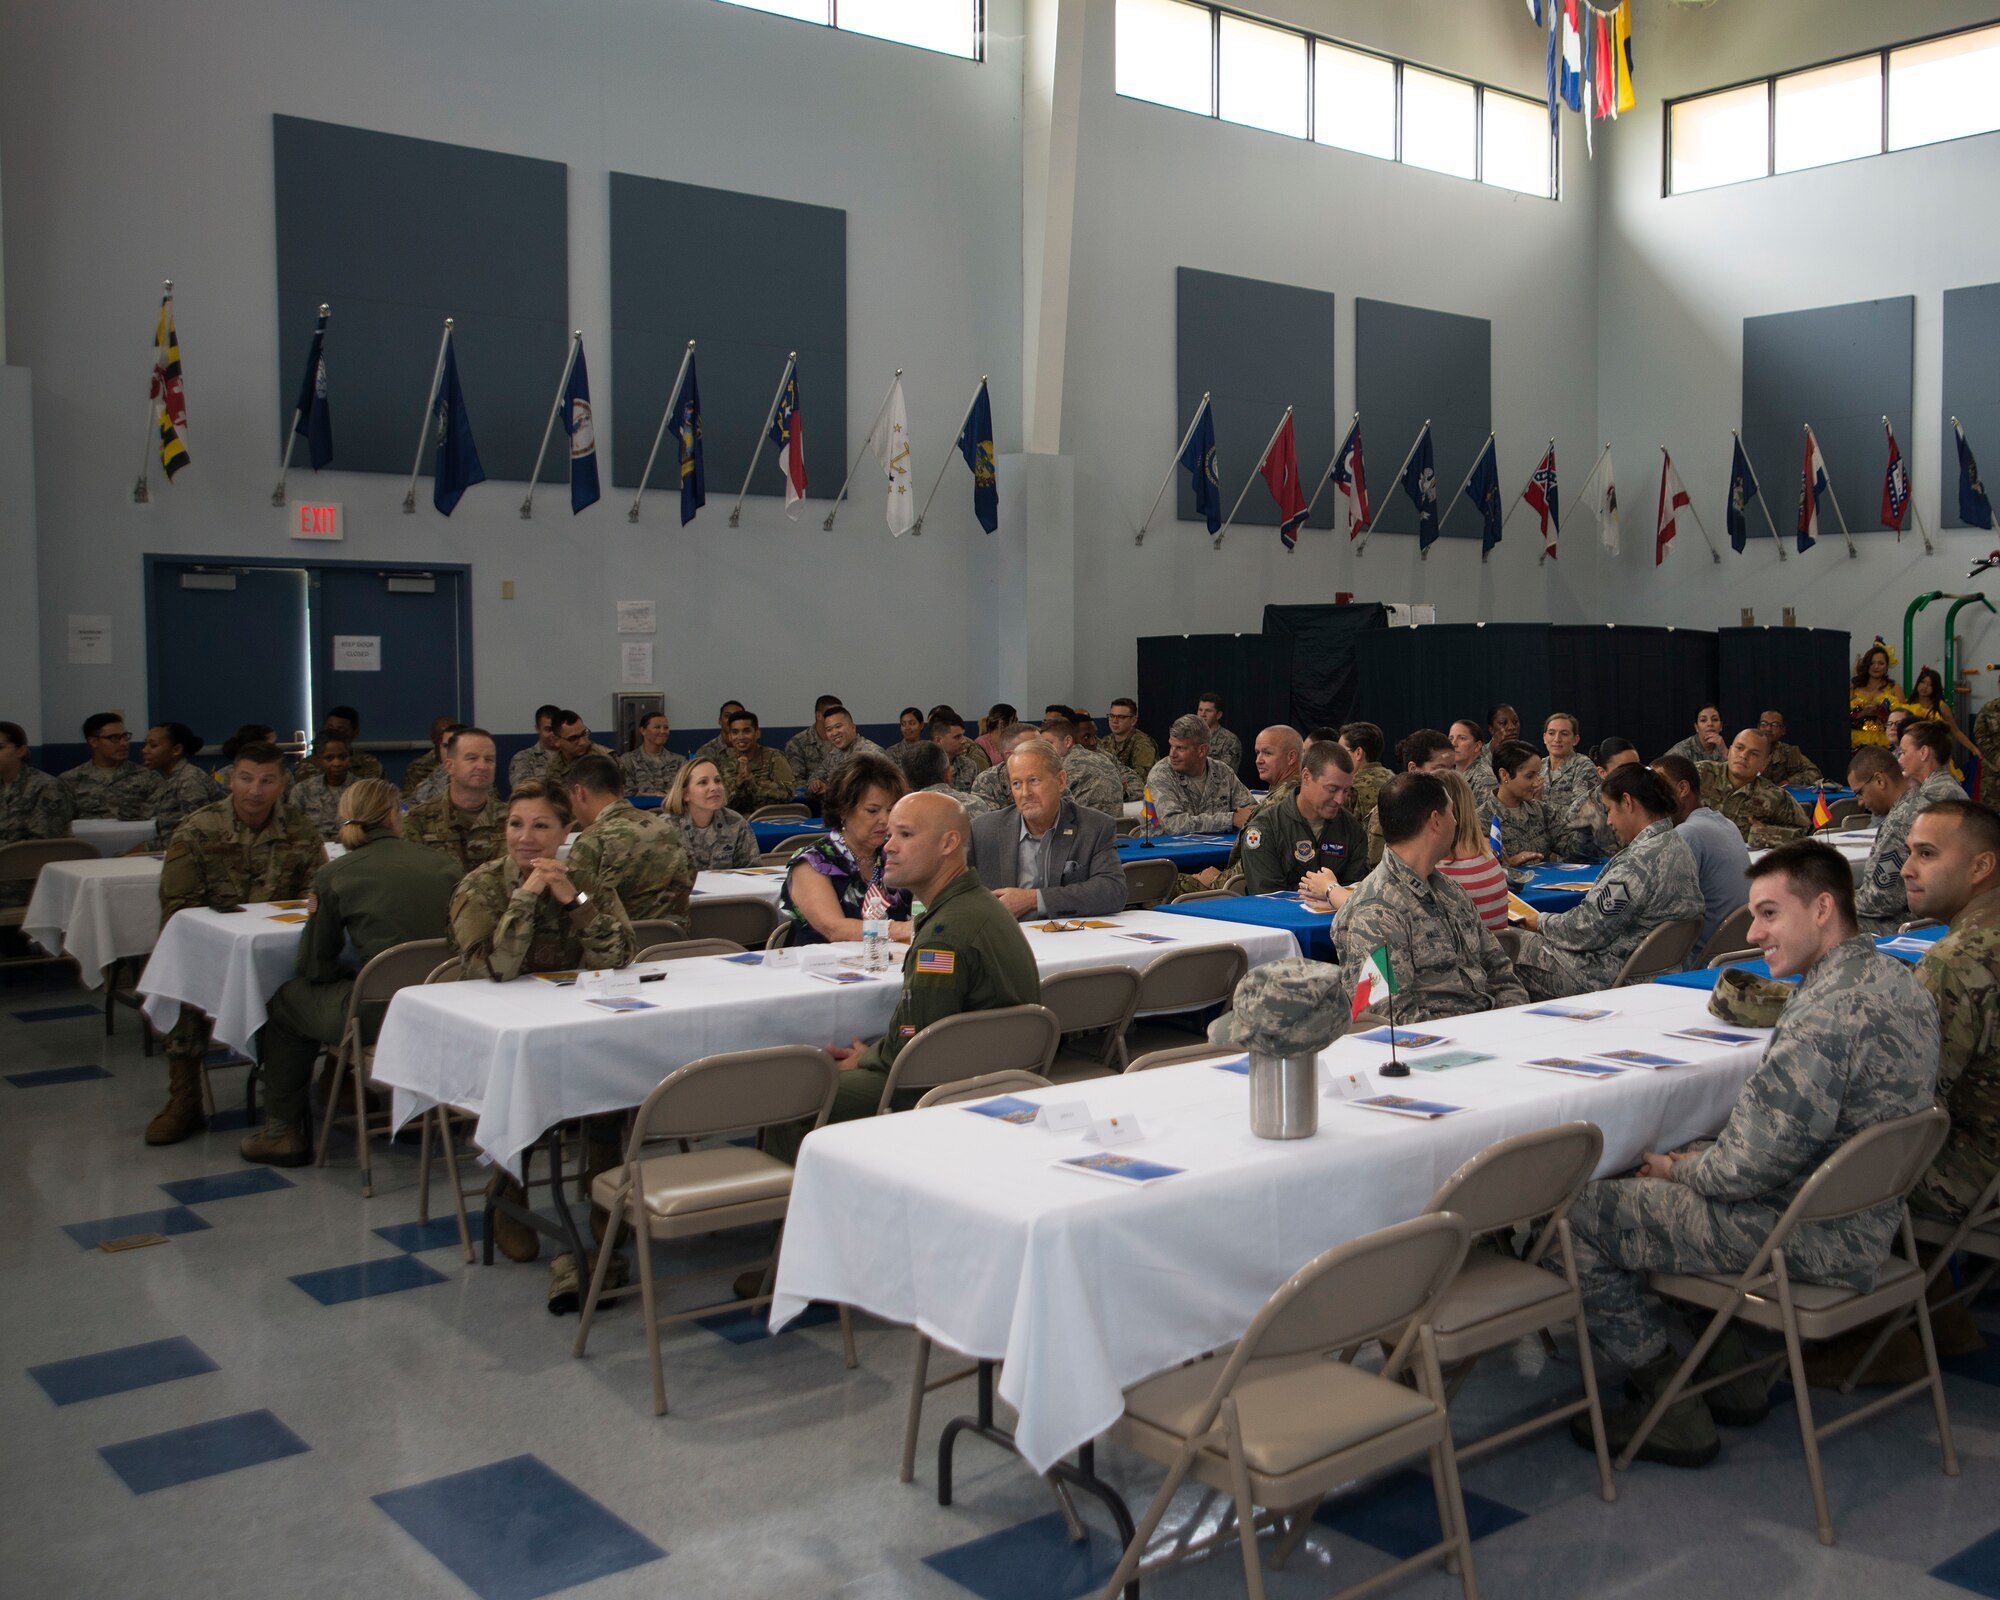 Attendees listen to the National Hispanic Heritage month luncheon opening remarks by U.S. Air Force Col. Stephen Snelson, 6th Air Mobility Wing Commander, at MacDill Air Force Base, Fla., Oct. 11, 2018.